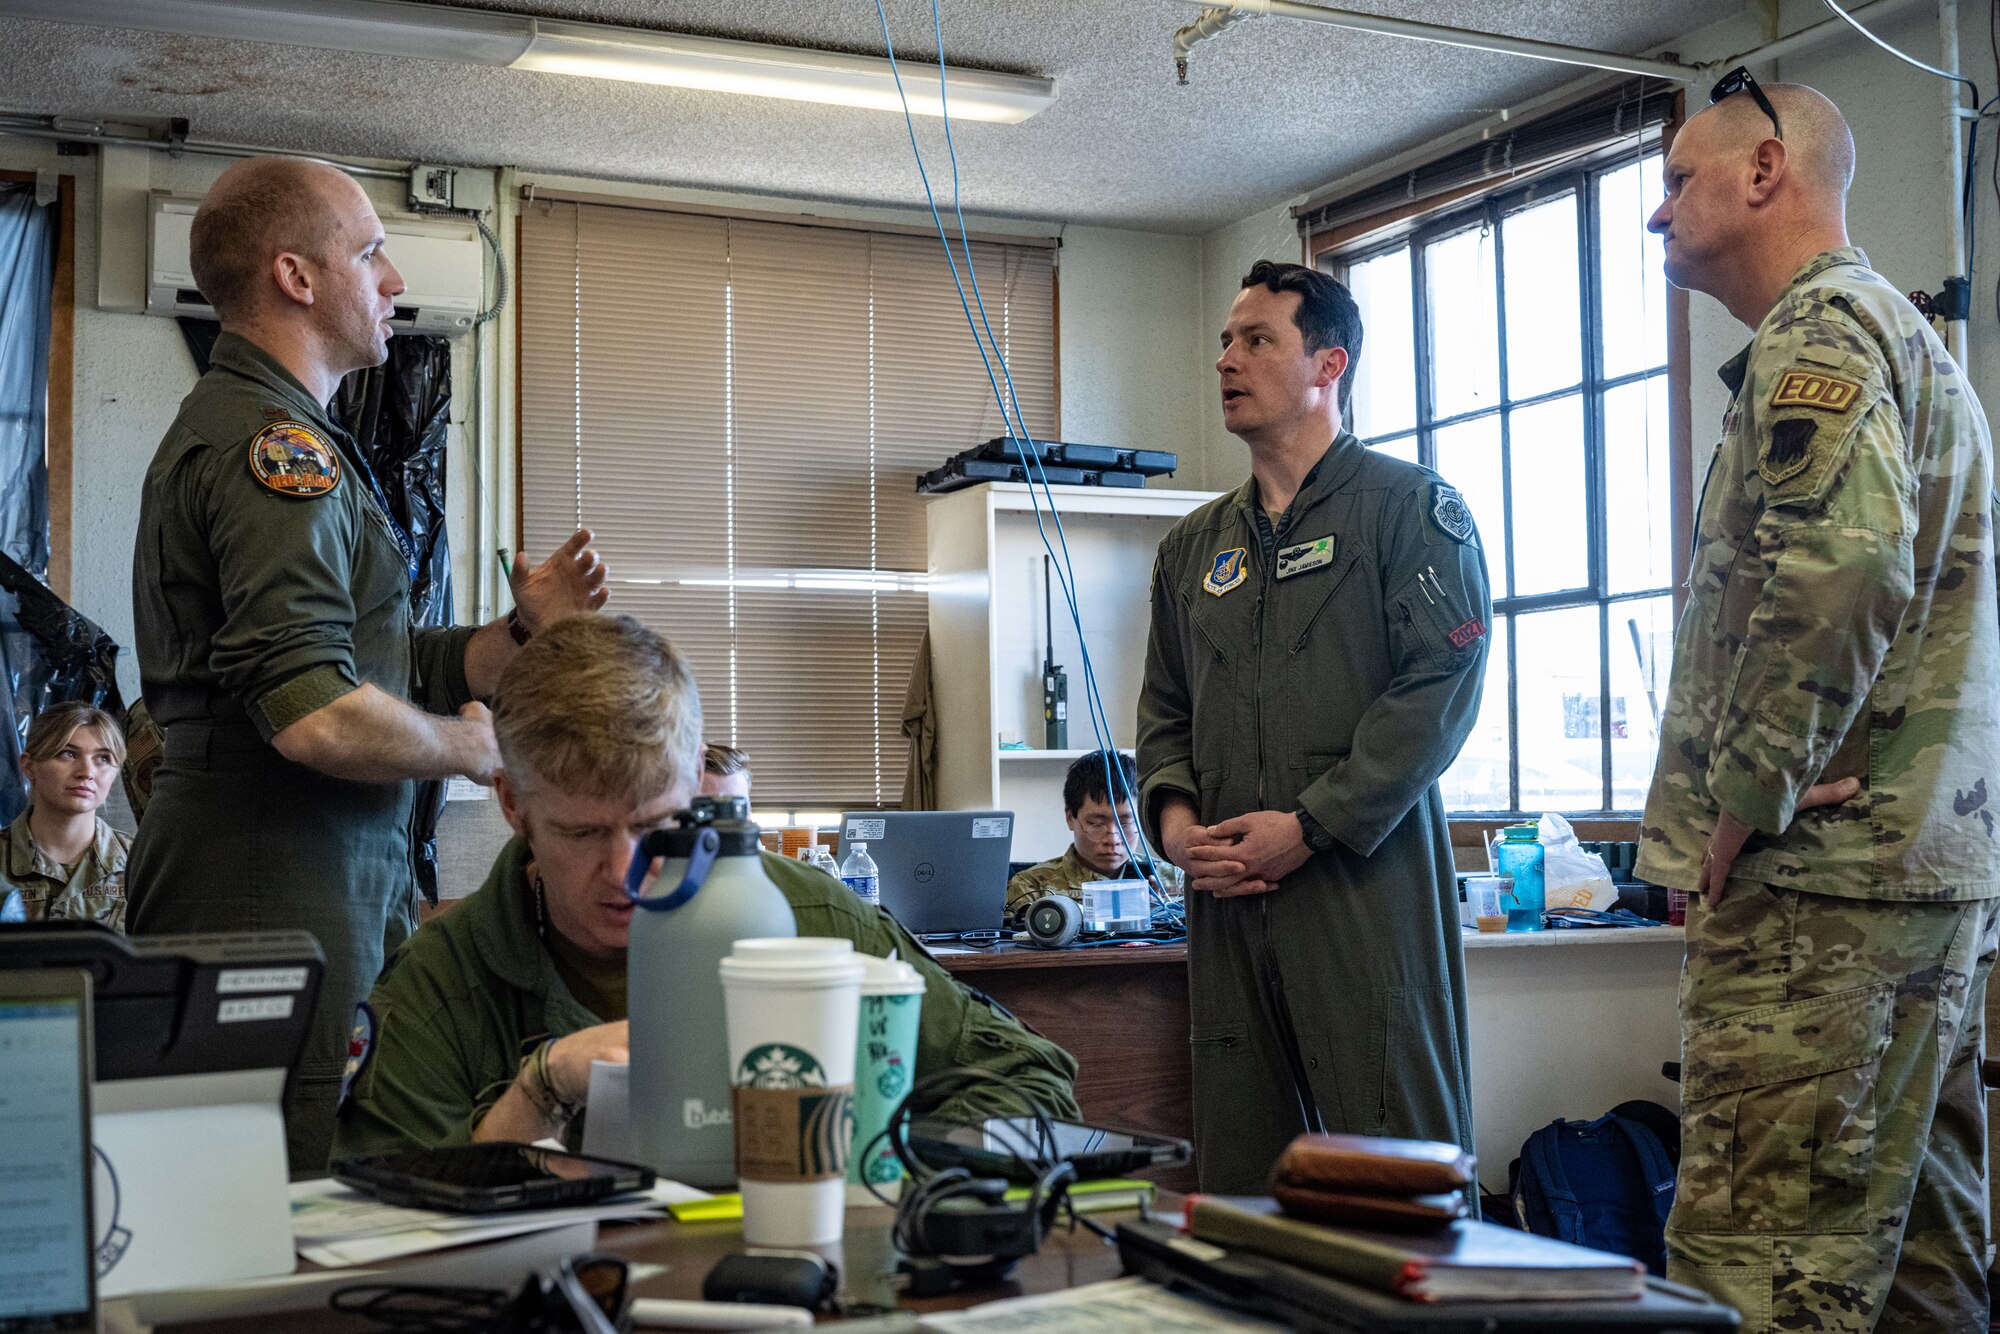 U.S. Air Force Maj. Kyle Nazarek (left), an F-22 Raptor pilot with the 525th Expeditionary Fighter Squadron, 3rd Air Expeditionary Wing, out of Joint Base Elmendorf-Richardson, Alaska, briefs U.S. Air Force Col. Kevin Jamieson (second from right), 3rd AEW commander, and U.S. Air Force Col. Joshua Demotts (right), 99th Air Base Wing commander, in the tactical operations center during Exercise Bamboo Eagle 24-1 at spoke Naval Air Station North Island, California, Jan. 31, 2024.